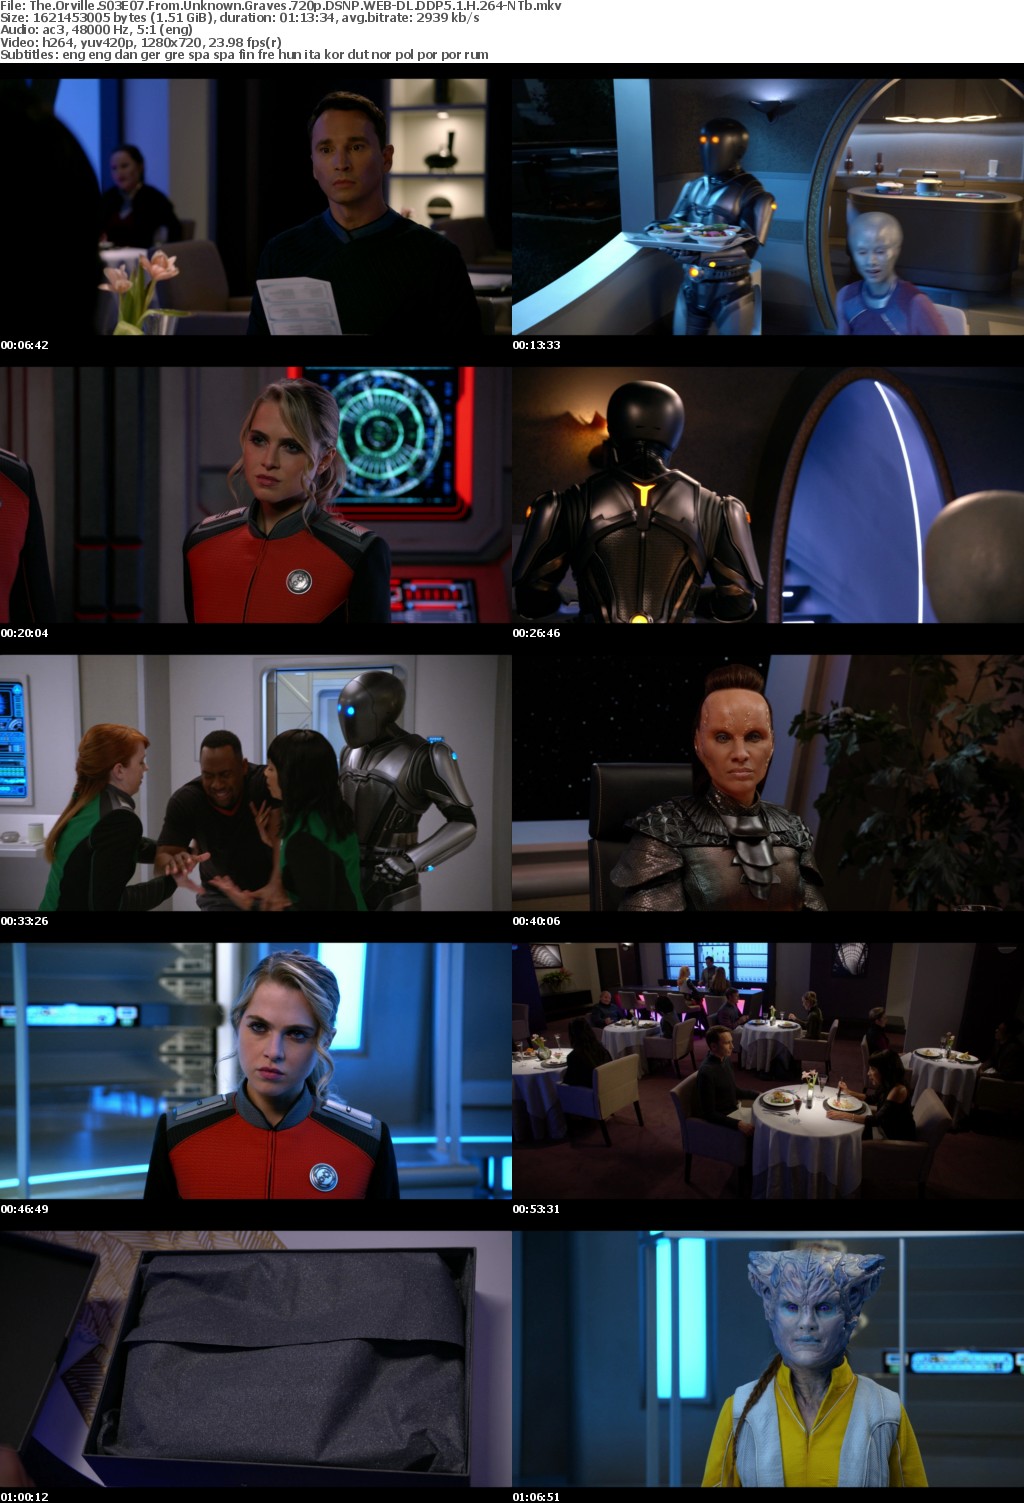 The Orville S03E07 From Unknown Graves 720p DSNP WEBRip DDP5 1 x264-NTb